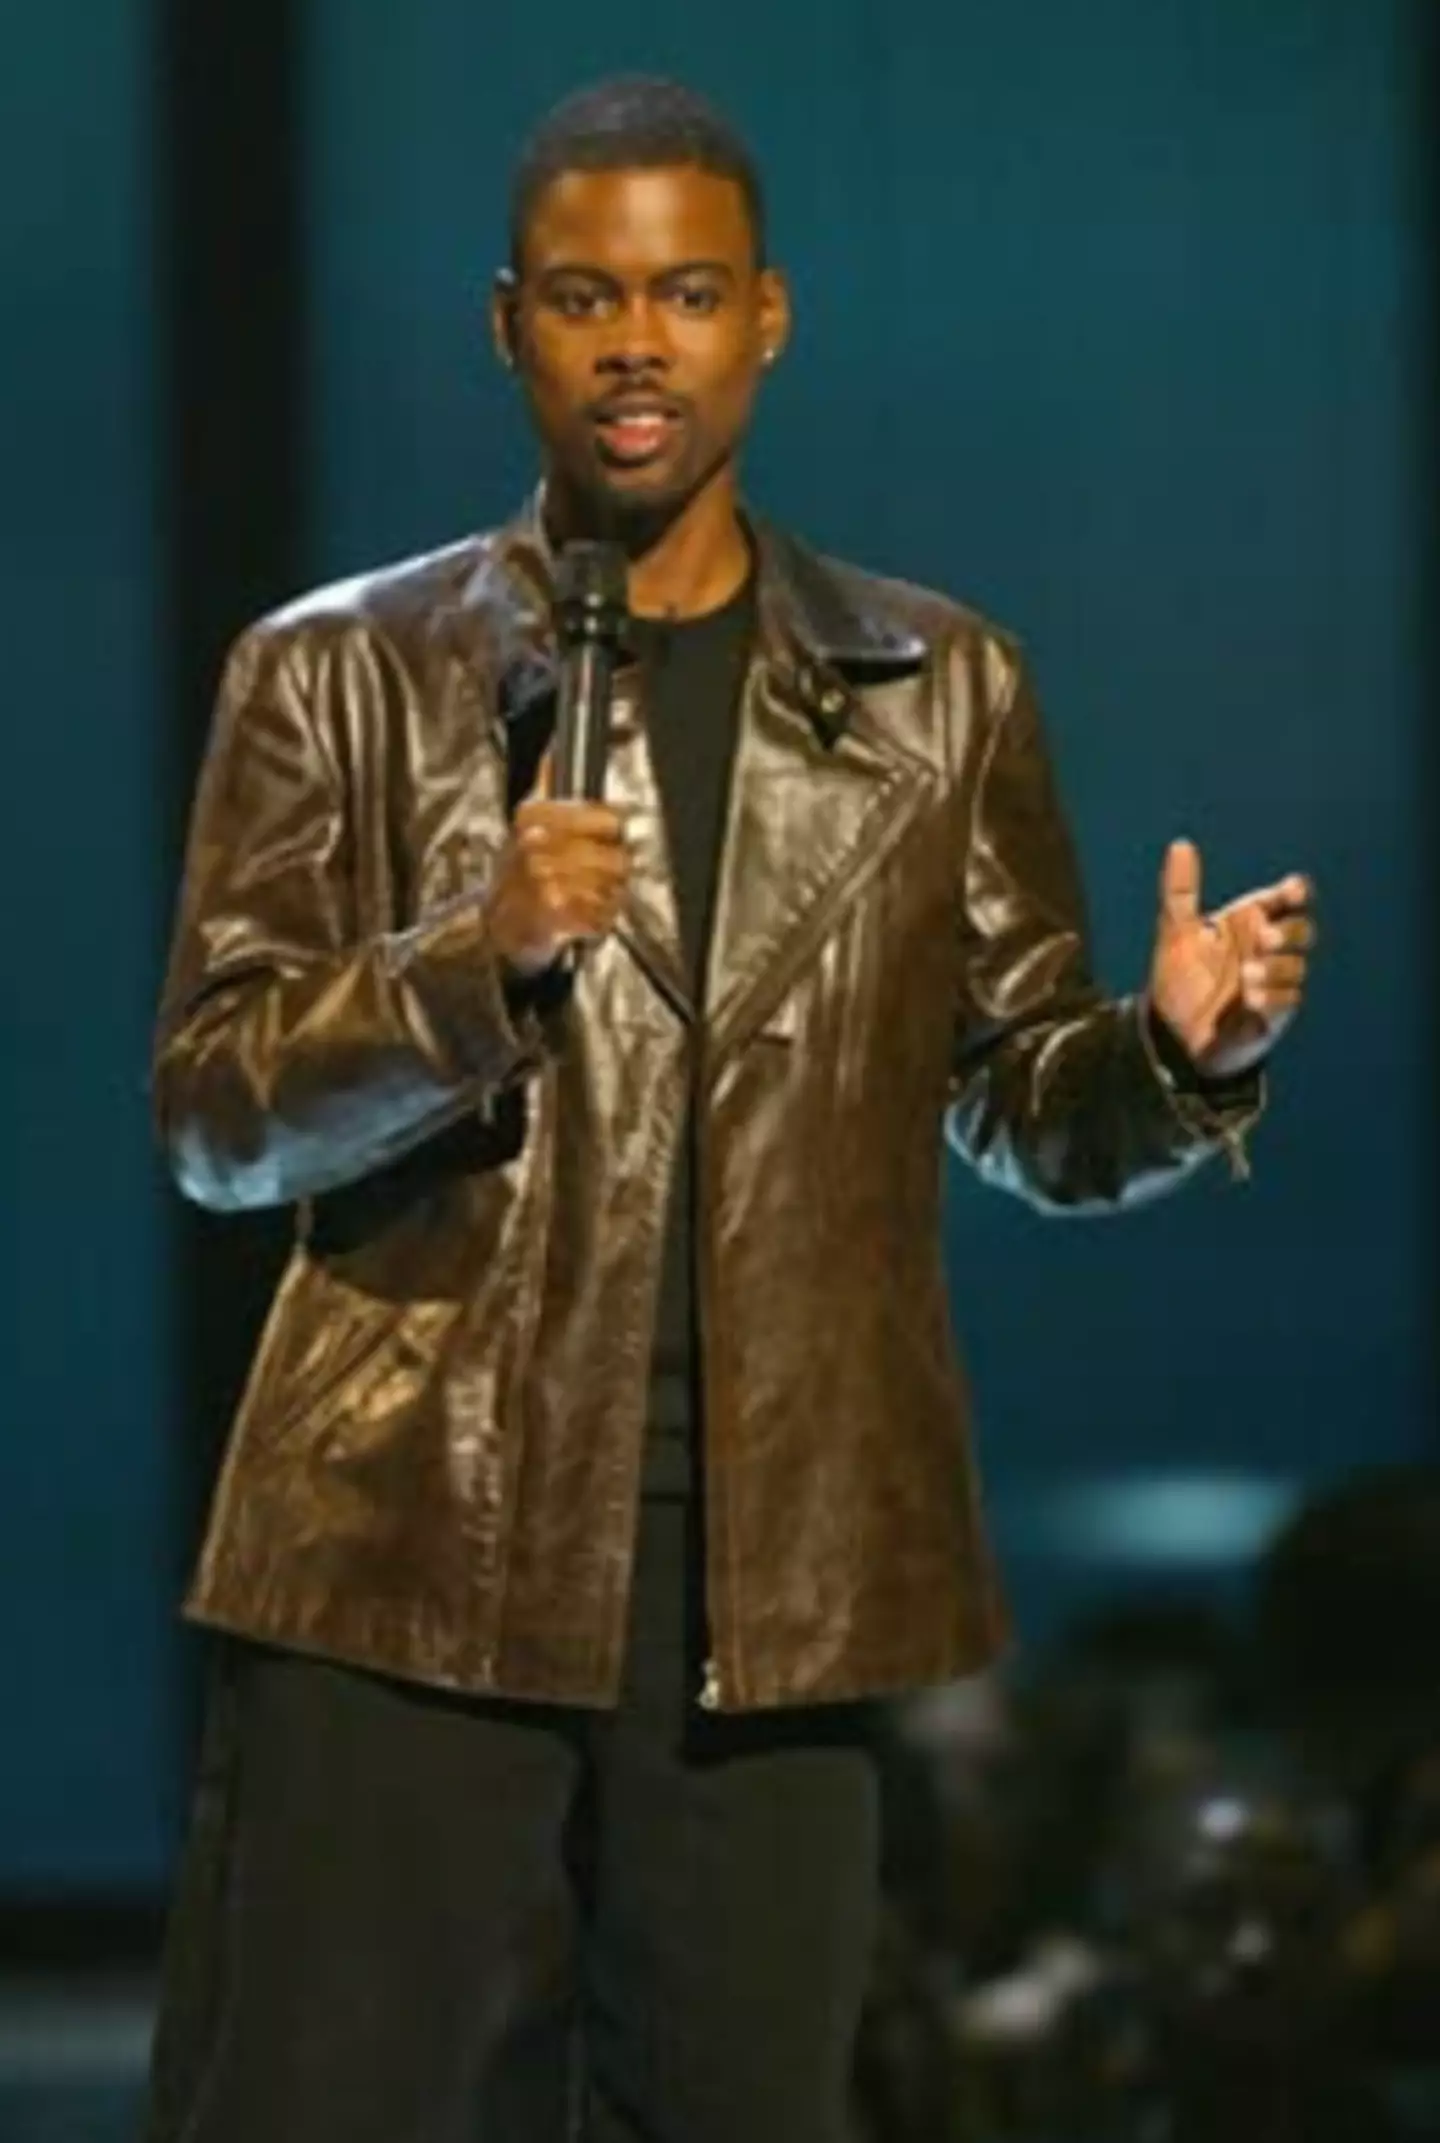 Chris Rock is used to controversy at awards shows.